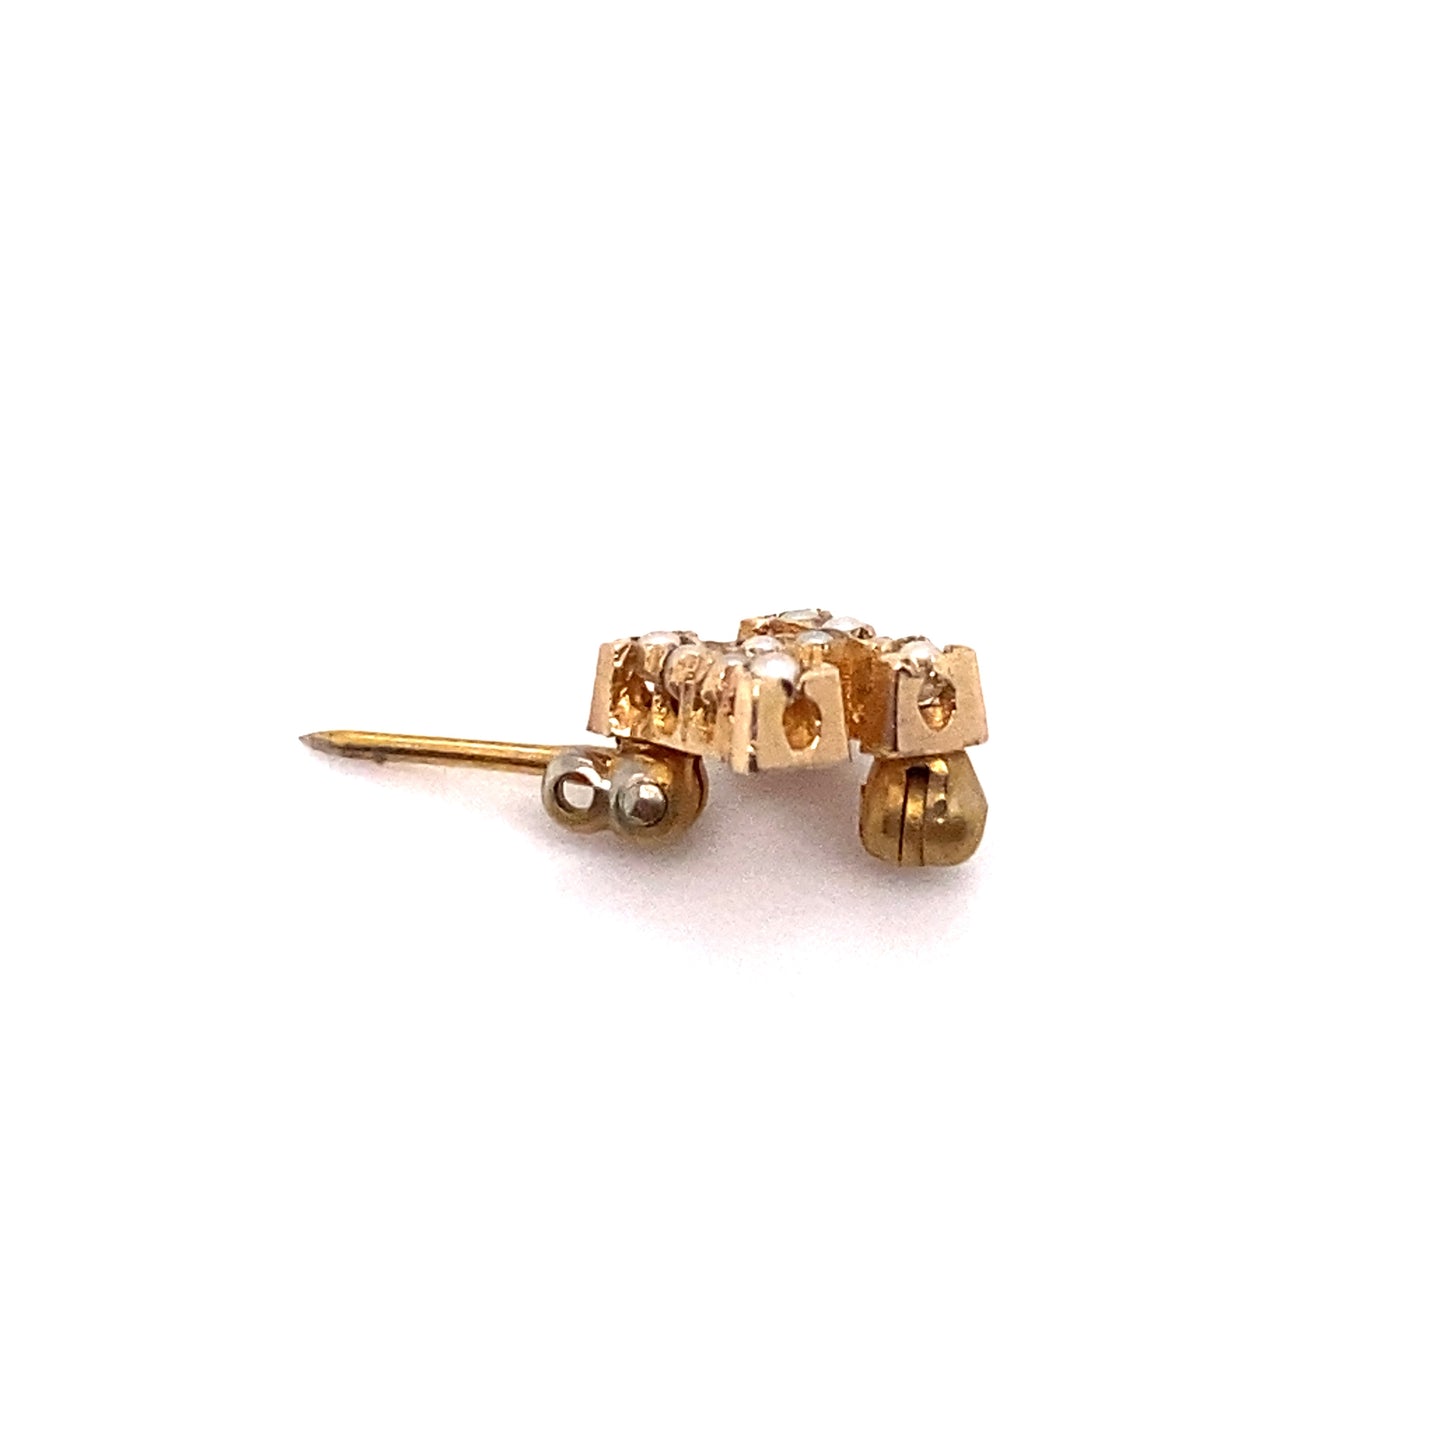 Circa 1920s Initial H Micro Pin with Seed Pearls in 14K Gold